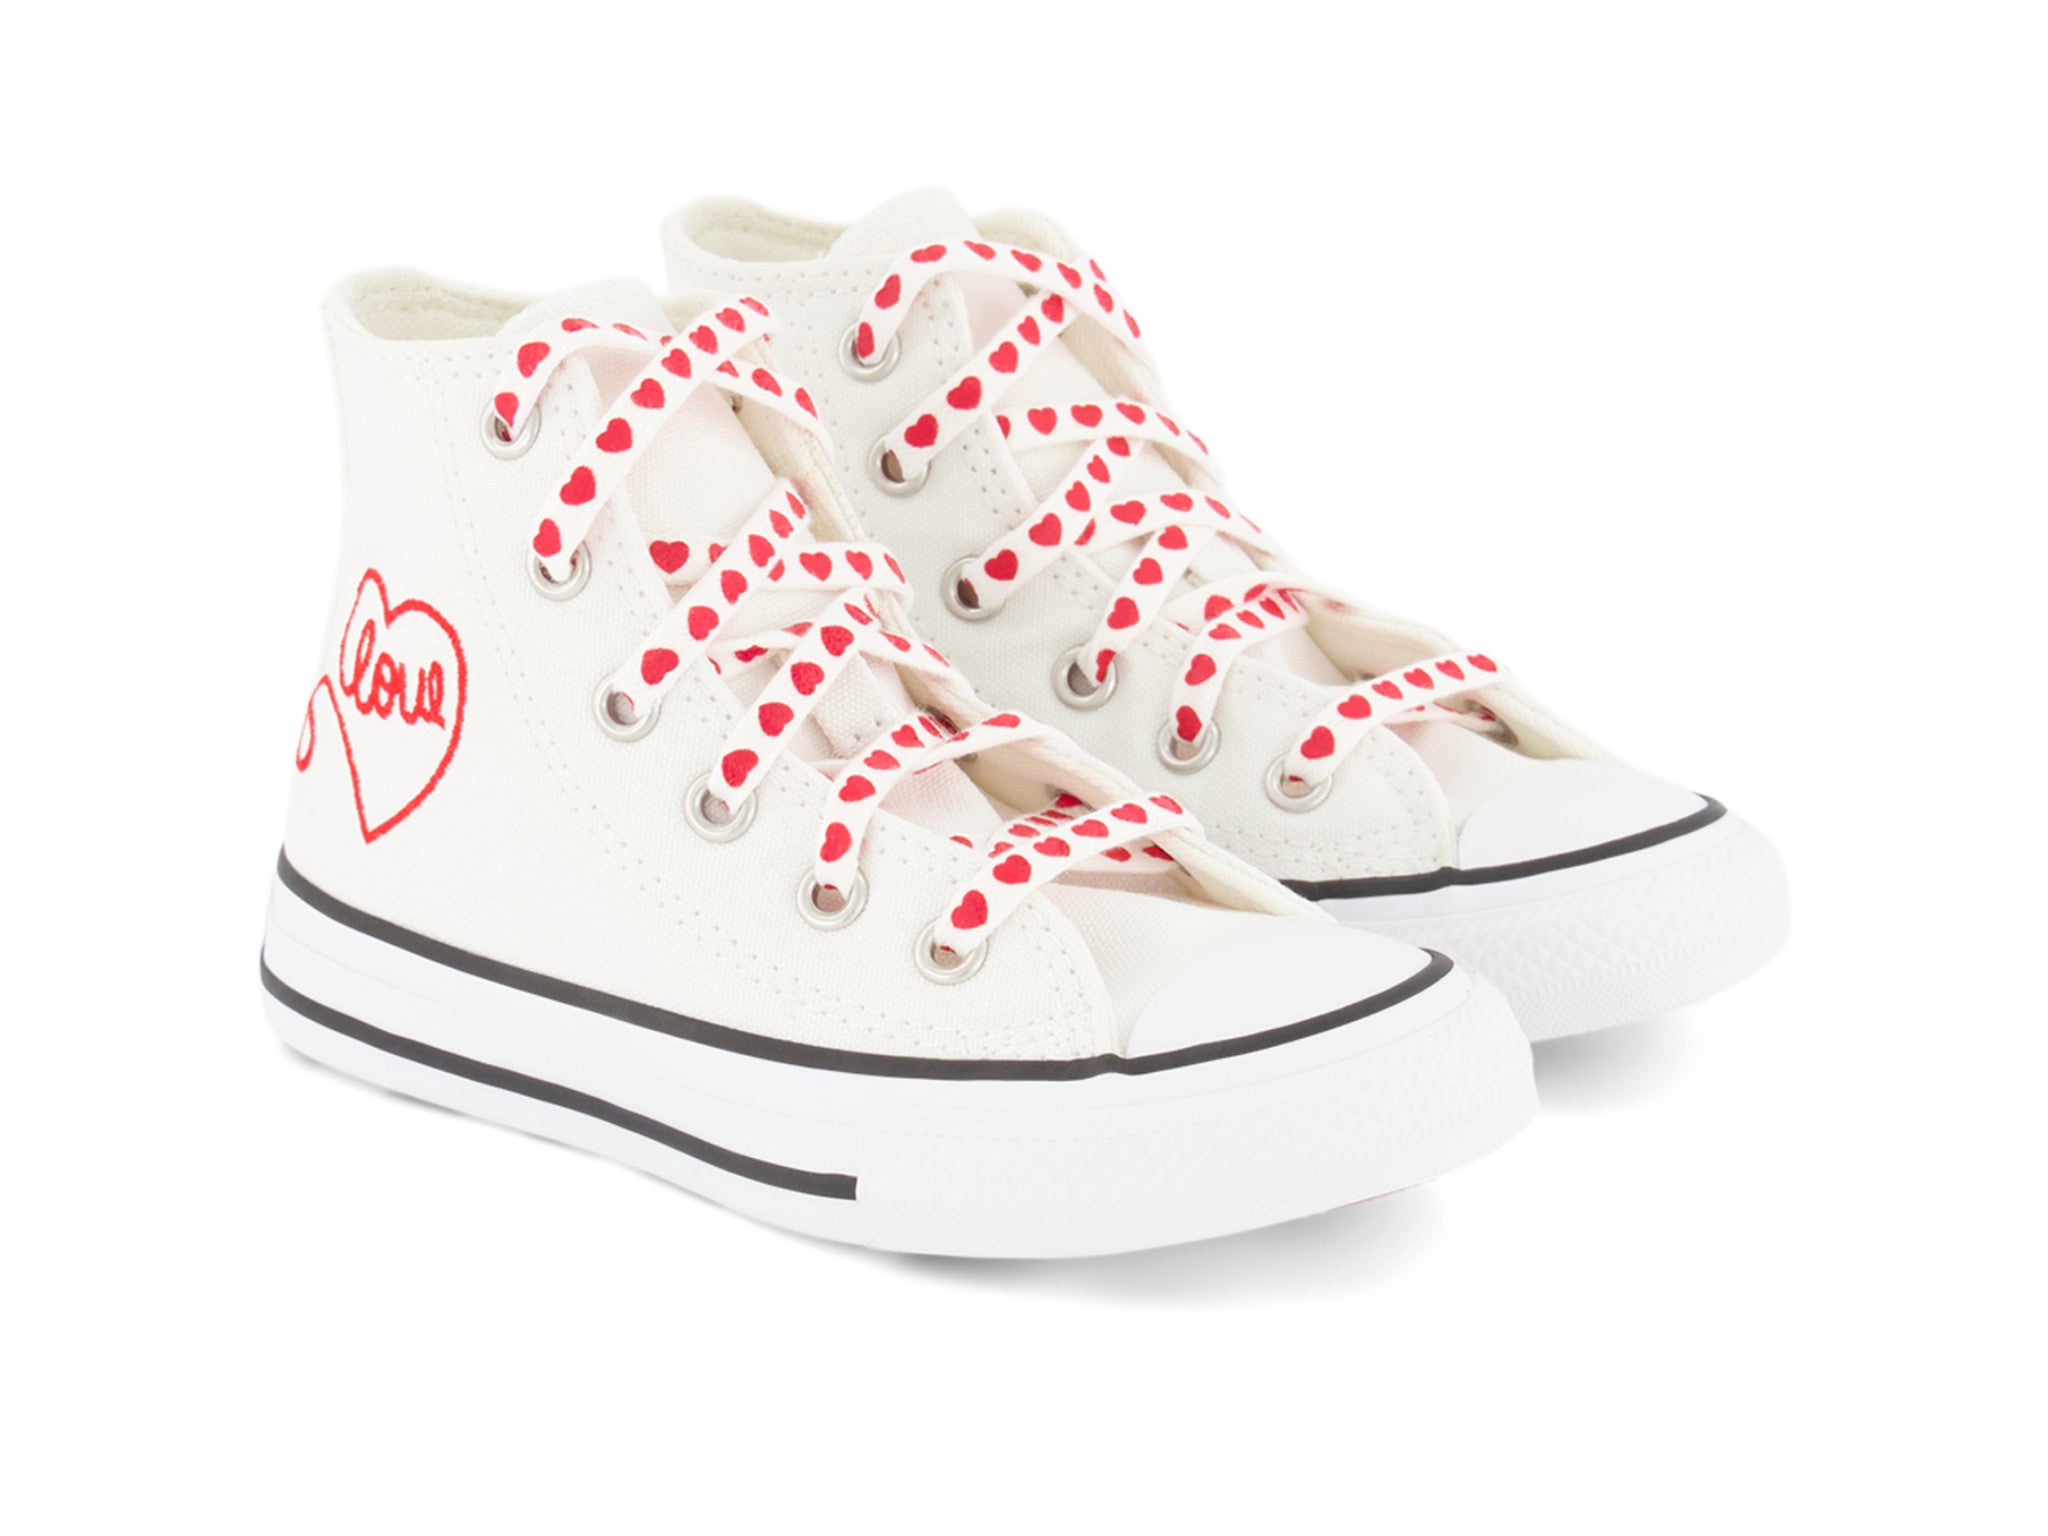 Alex and Alexa Converse White Made with Love Chuck Taylor All Star Hi Tops Trainers